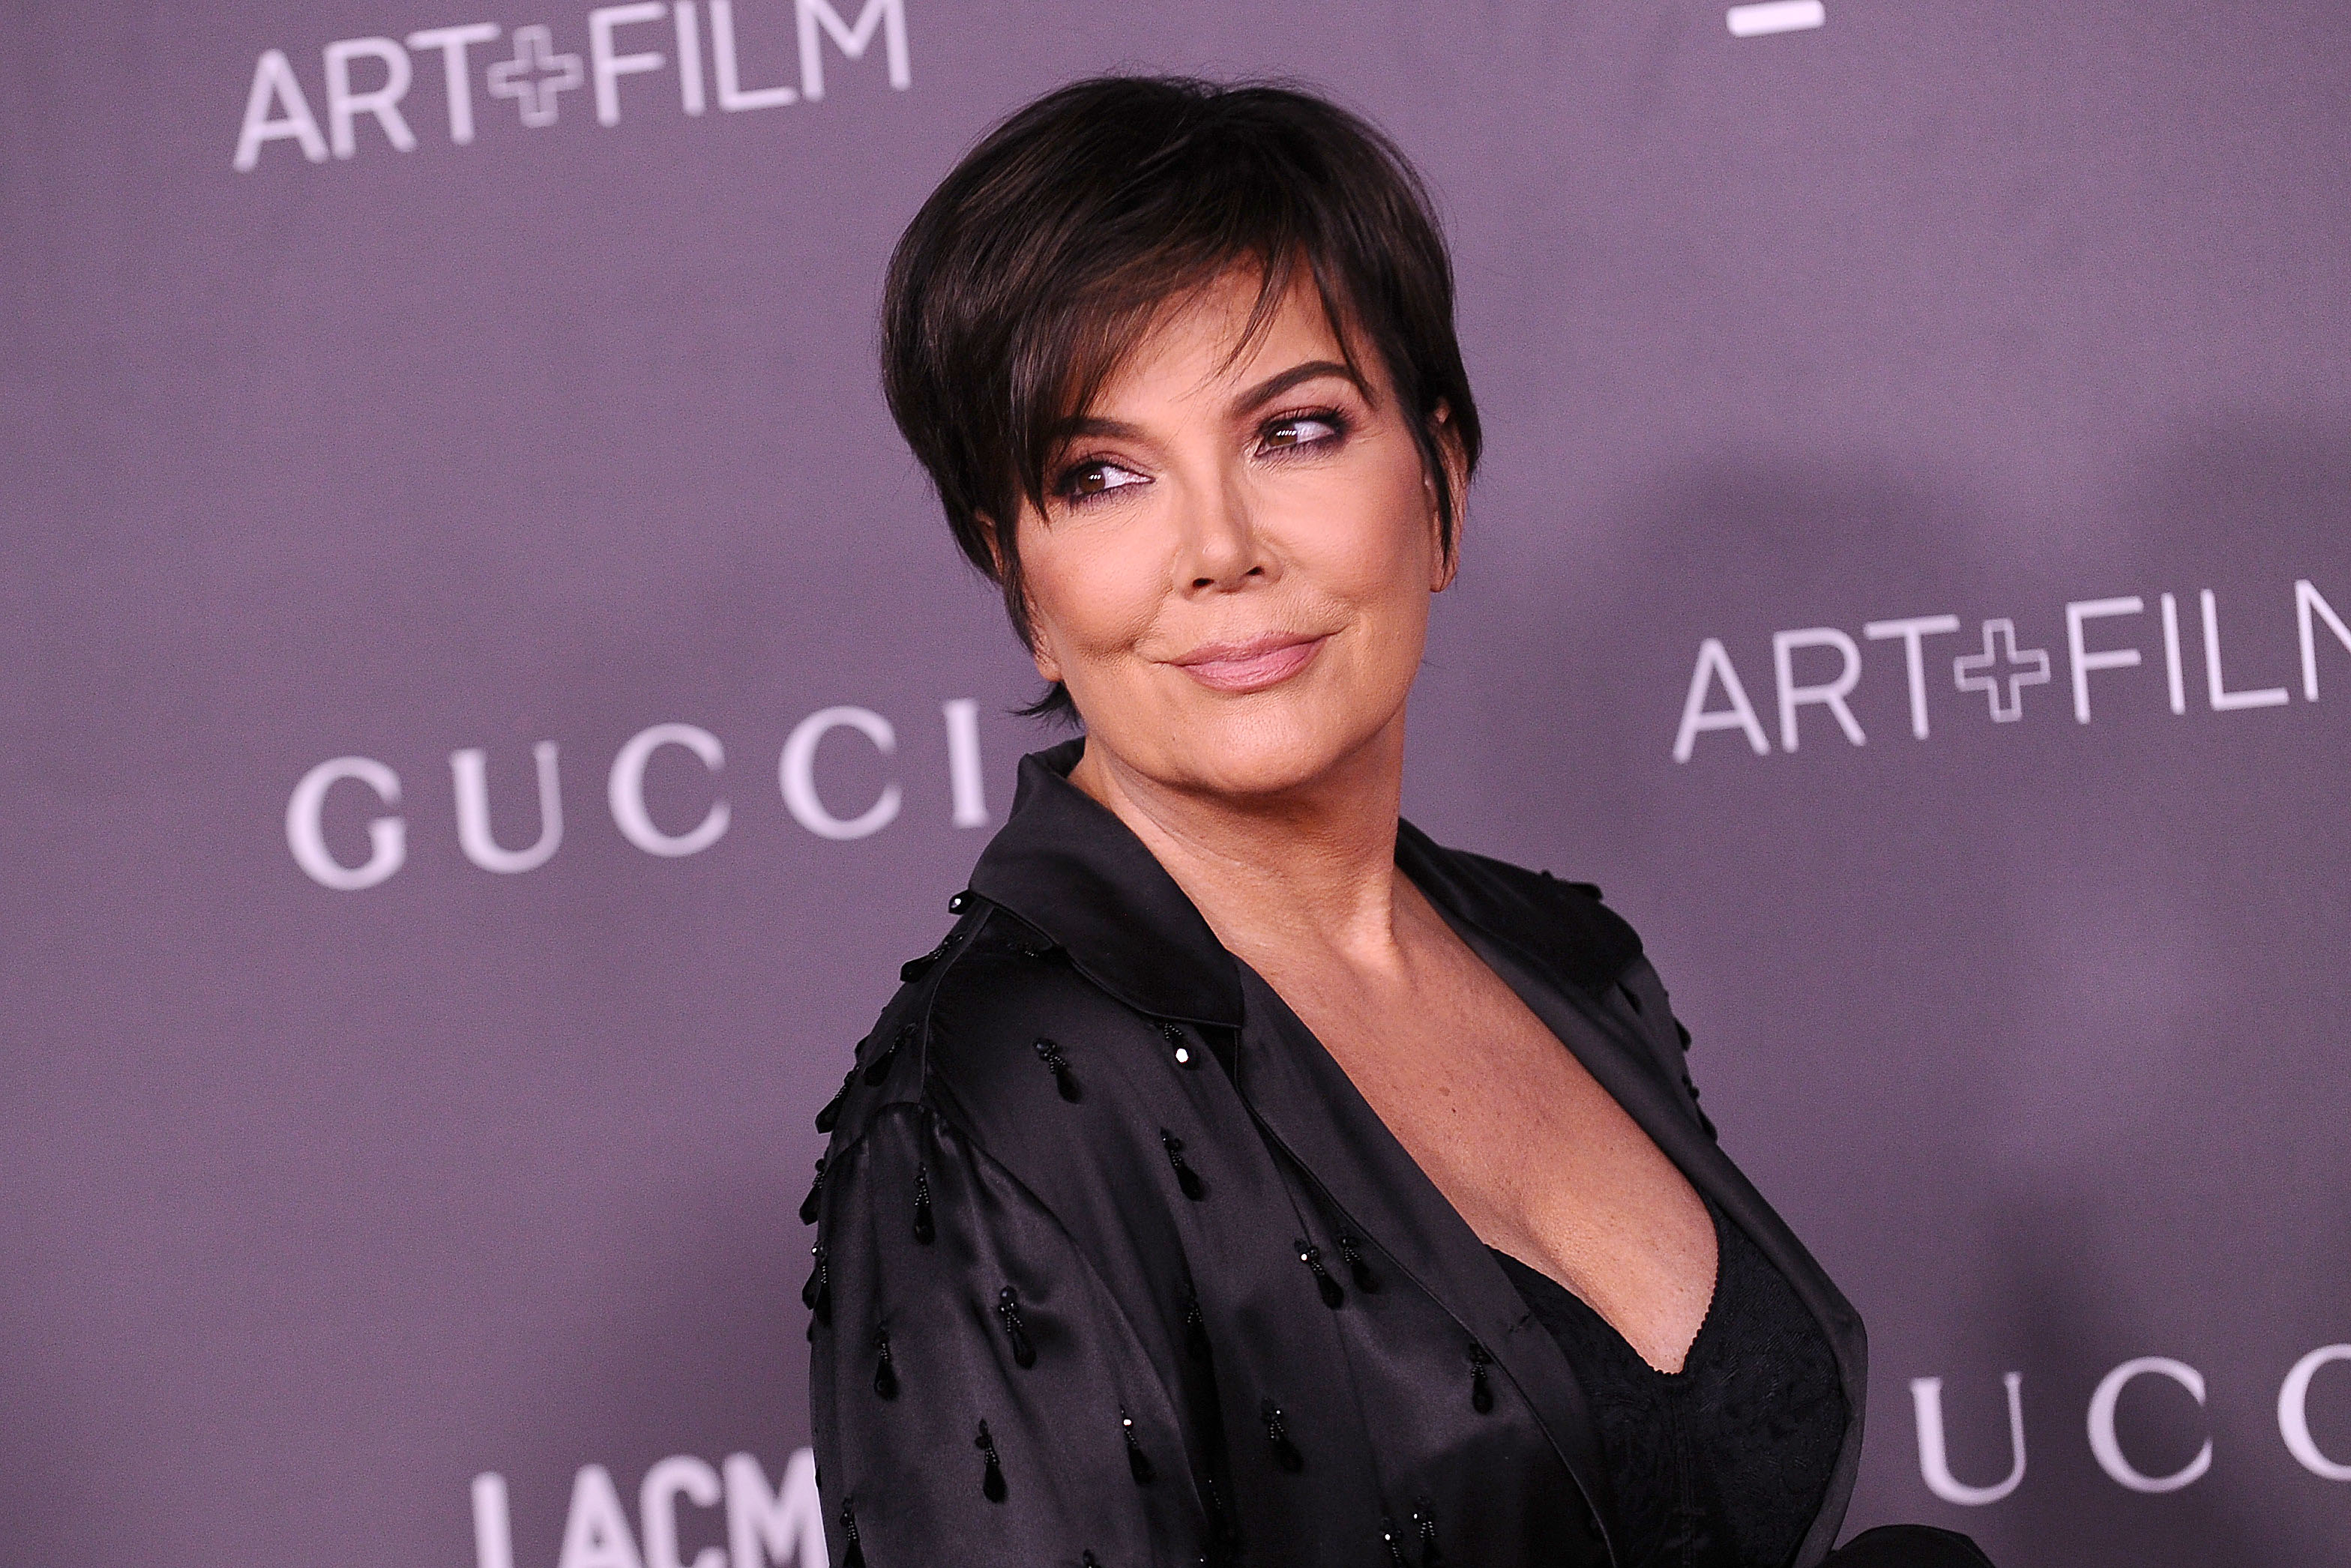 The Kardashians star has been showing off her weight loss